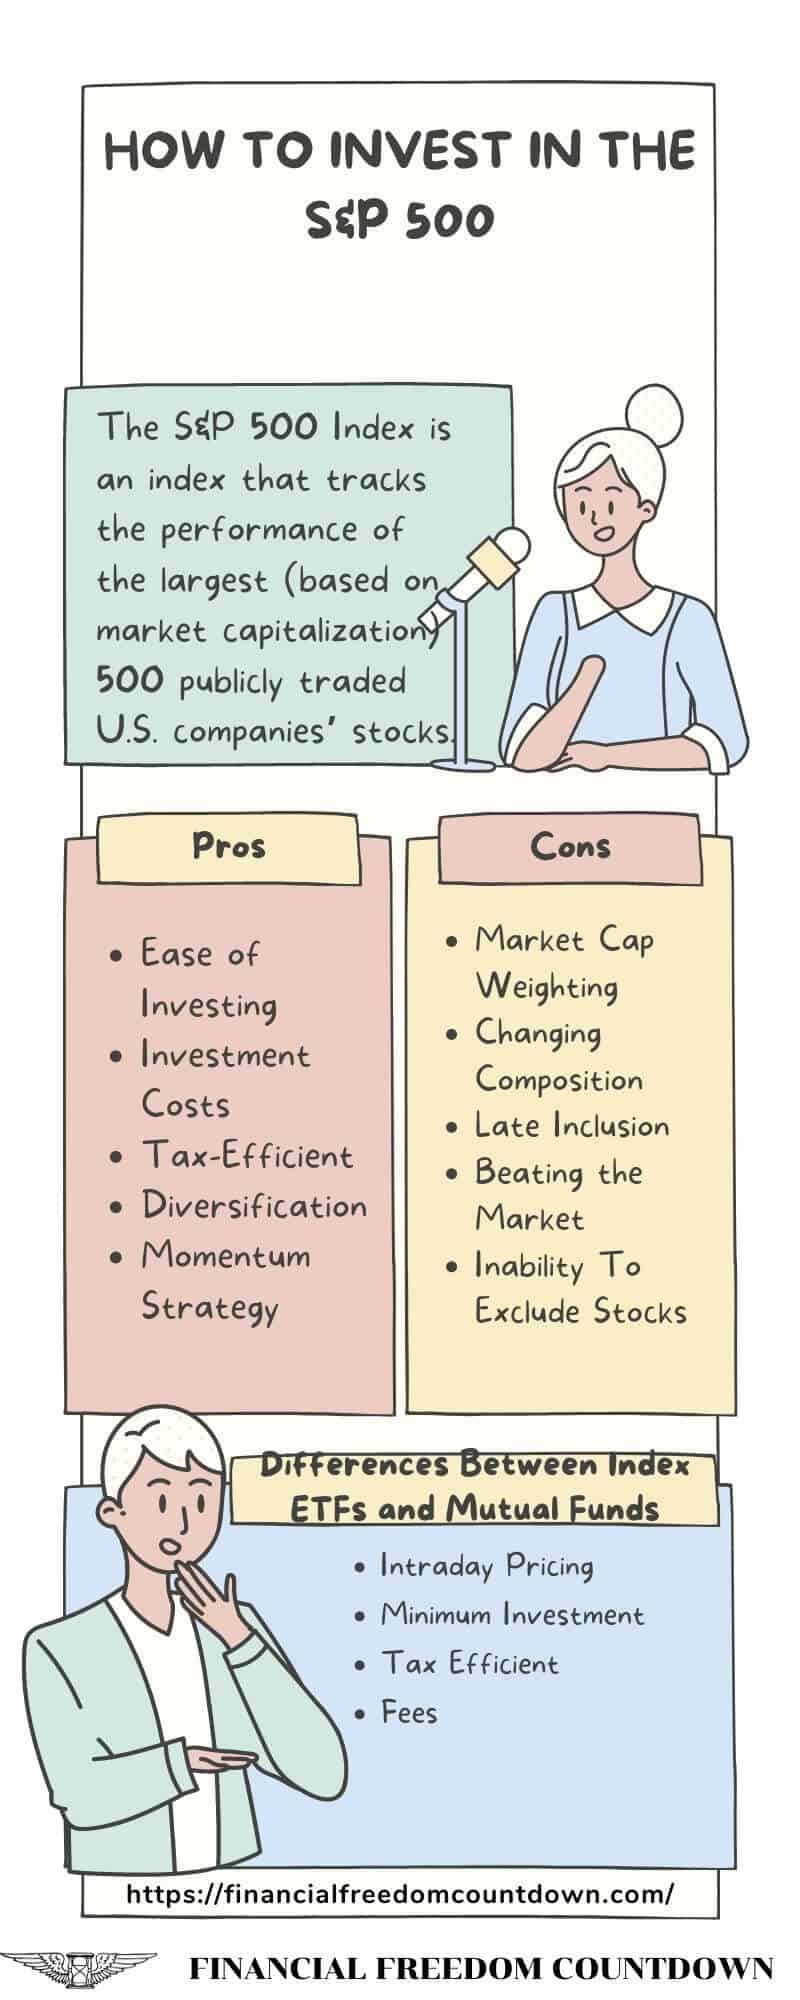 How To Invest In The S&P 500 - Pros and Cons